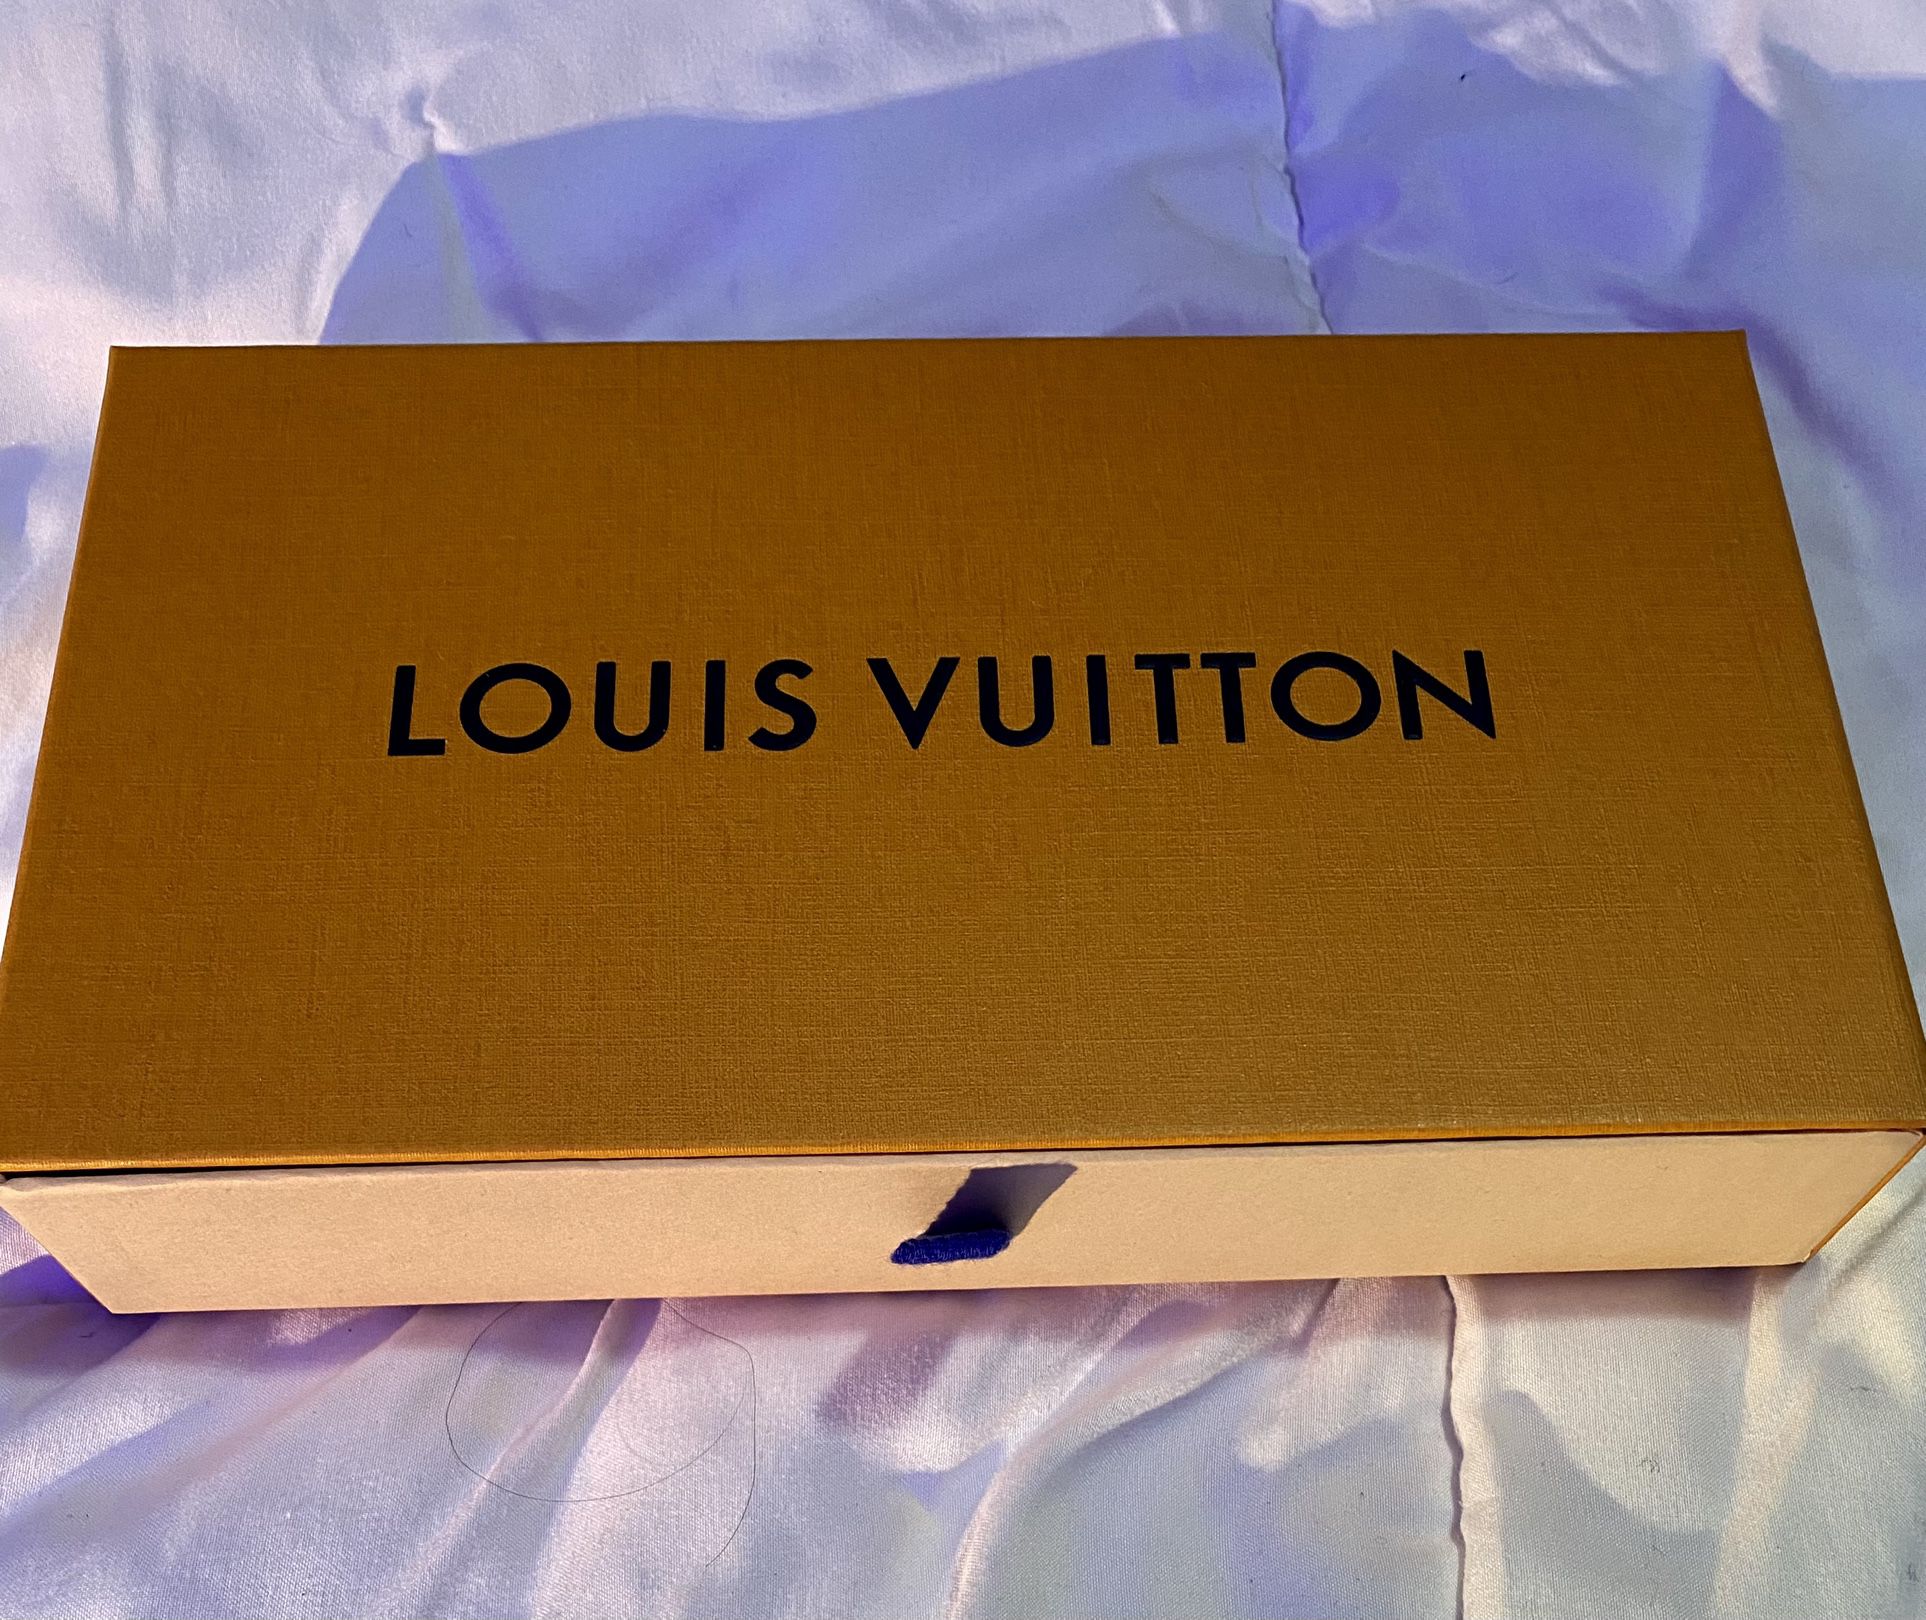 Louis Vuitton Gift/Storage Box for Sale in Las Vegas, NV - OfferUp